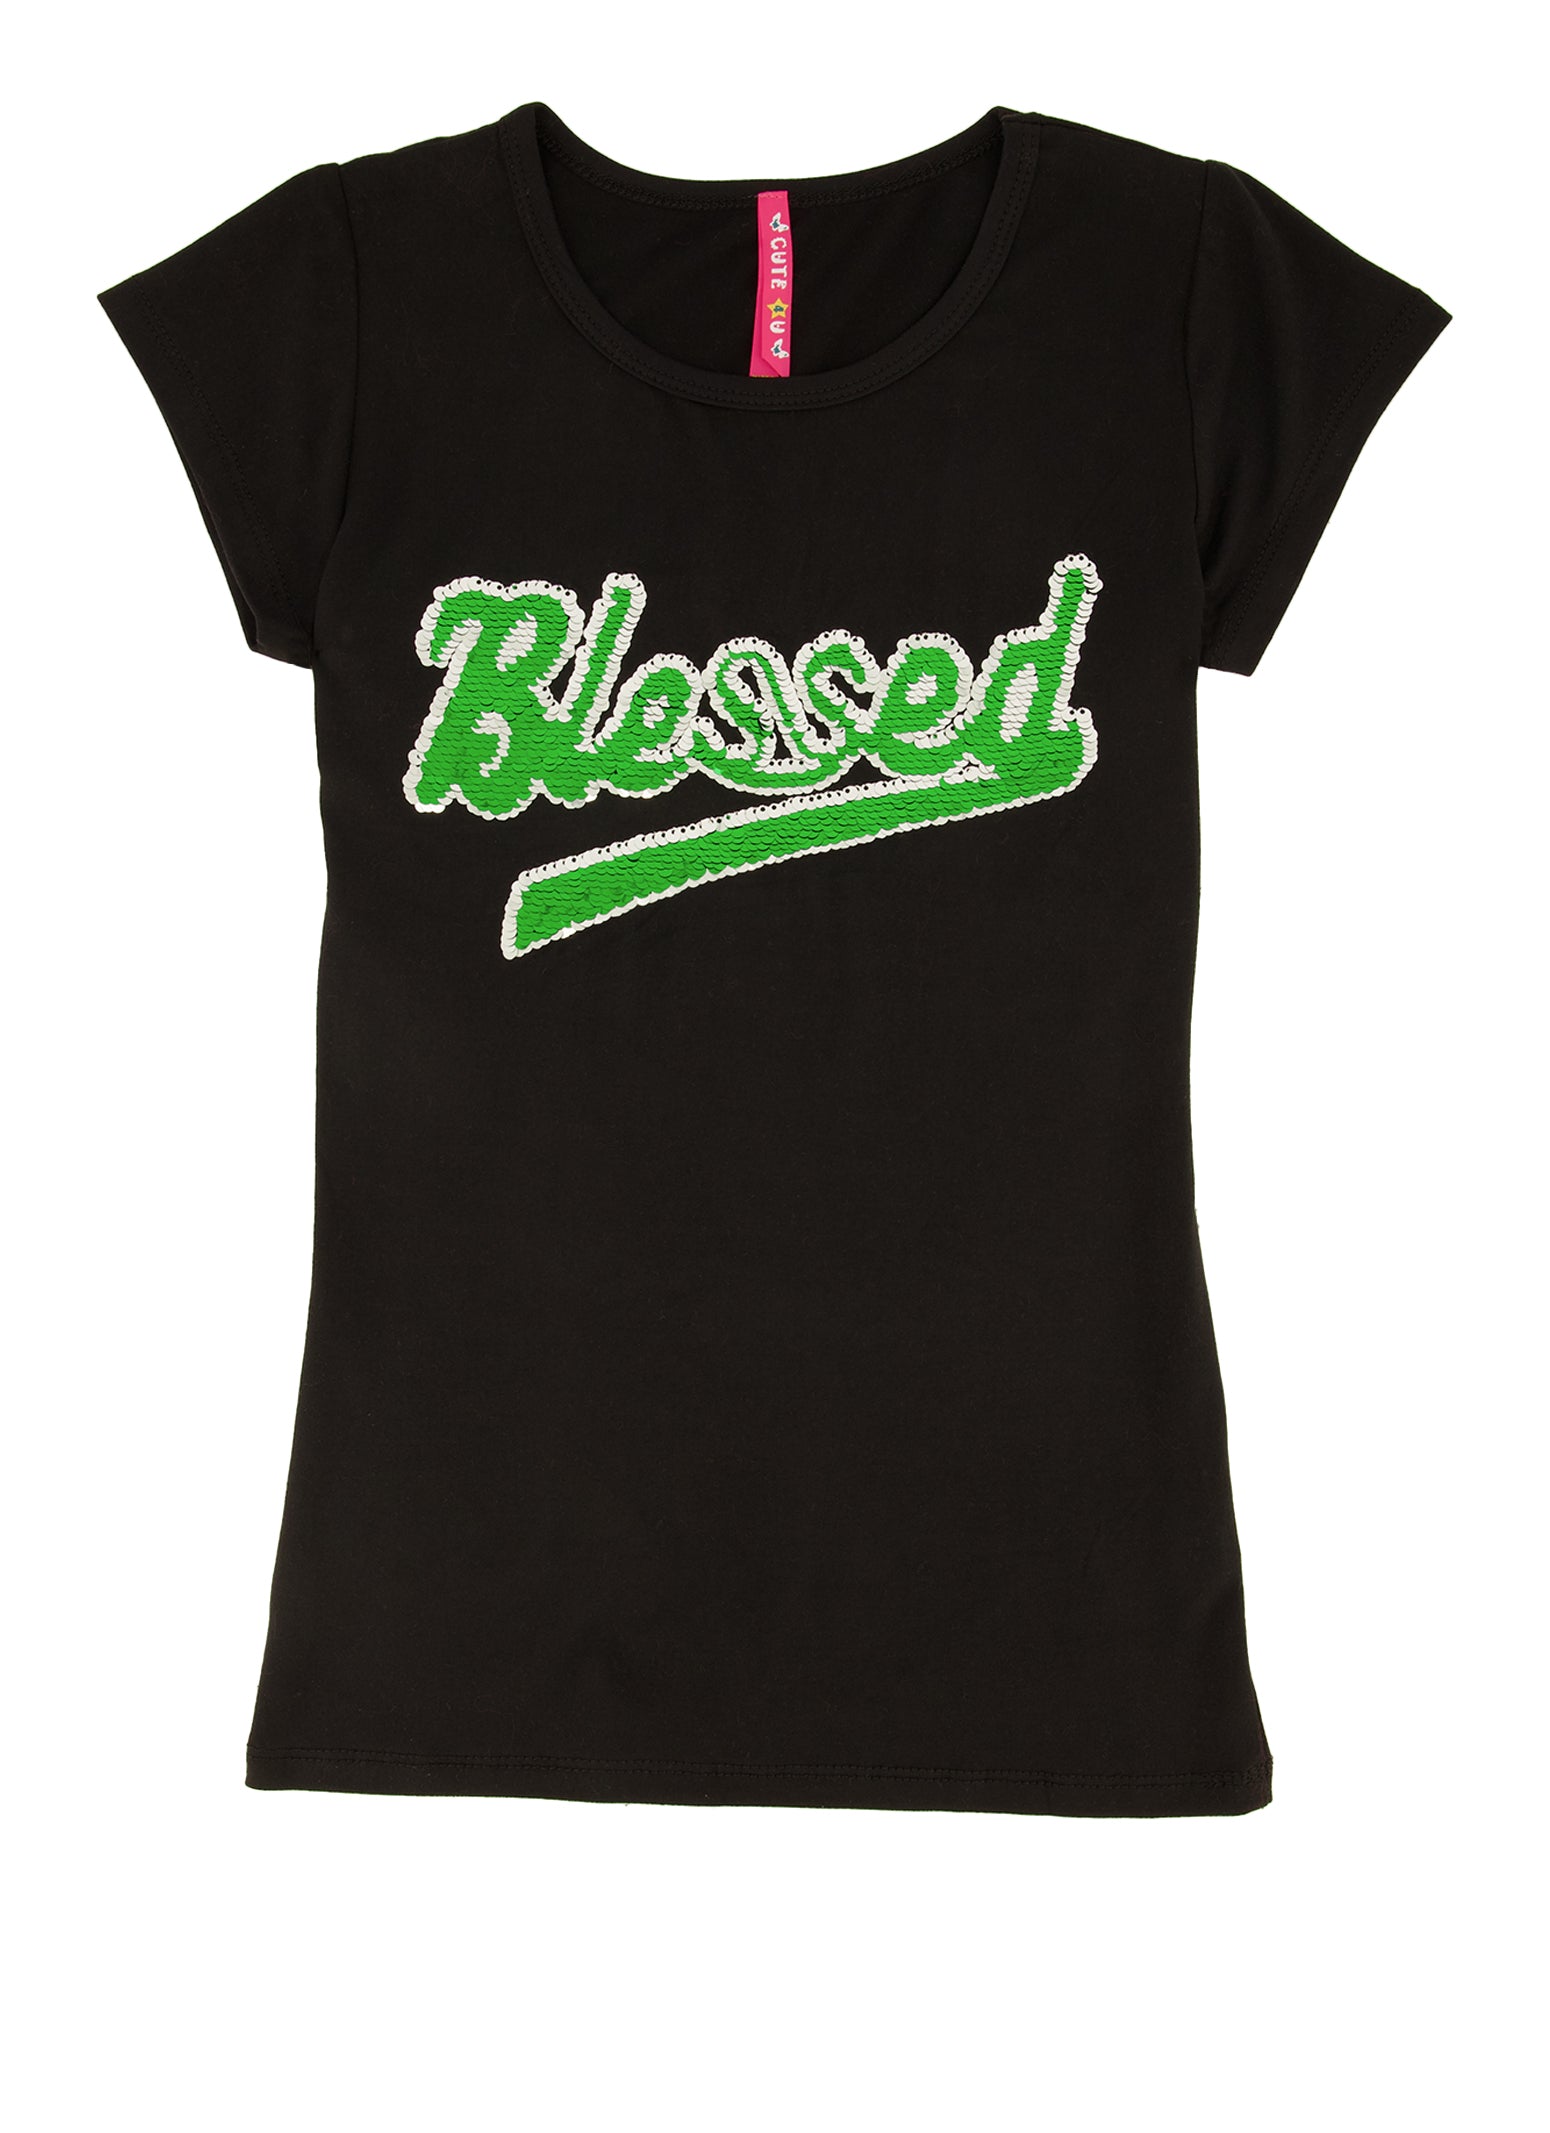 Girls Blessed Reversible Sequin Graphic Tee, Black, Size 7-8